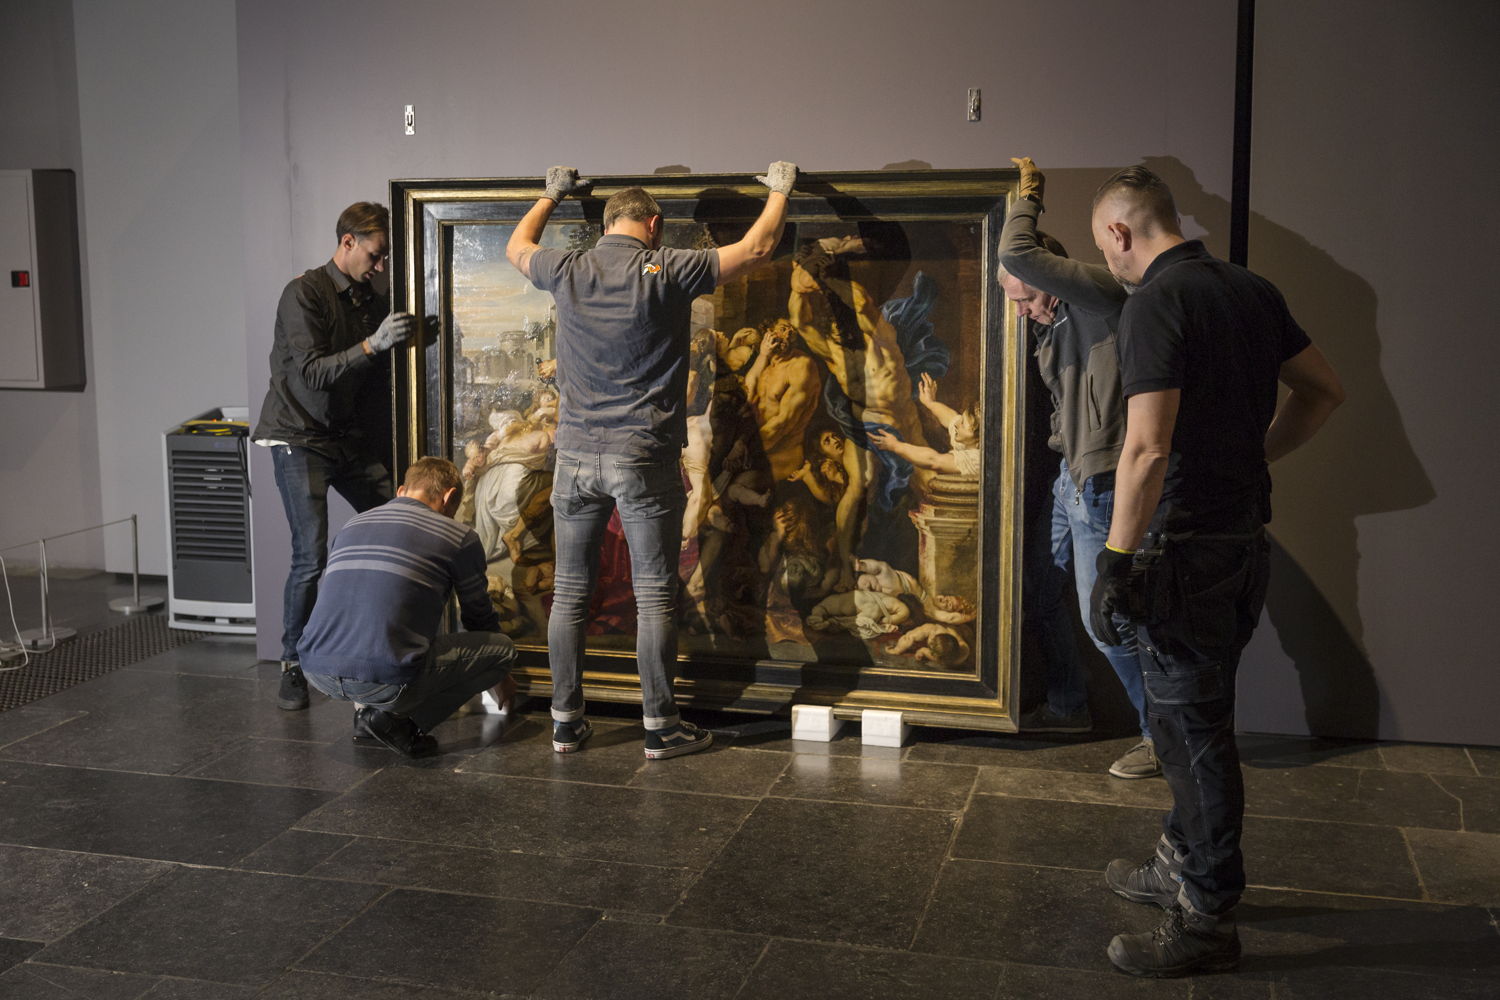 Image name: 31_Rubens, Arrival of the Massacre at the Rubens House, The Thomson Collection at the Art Gallery of Ontario, Art Gallery of Ontario, photo Ans Brys.jpg